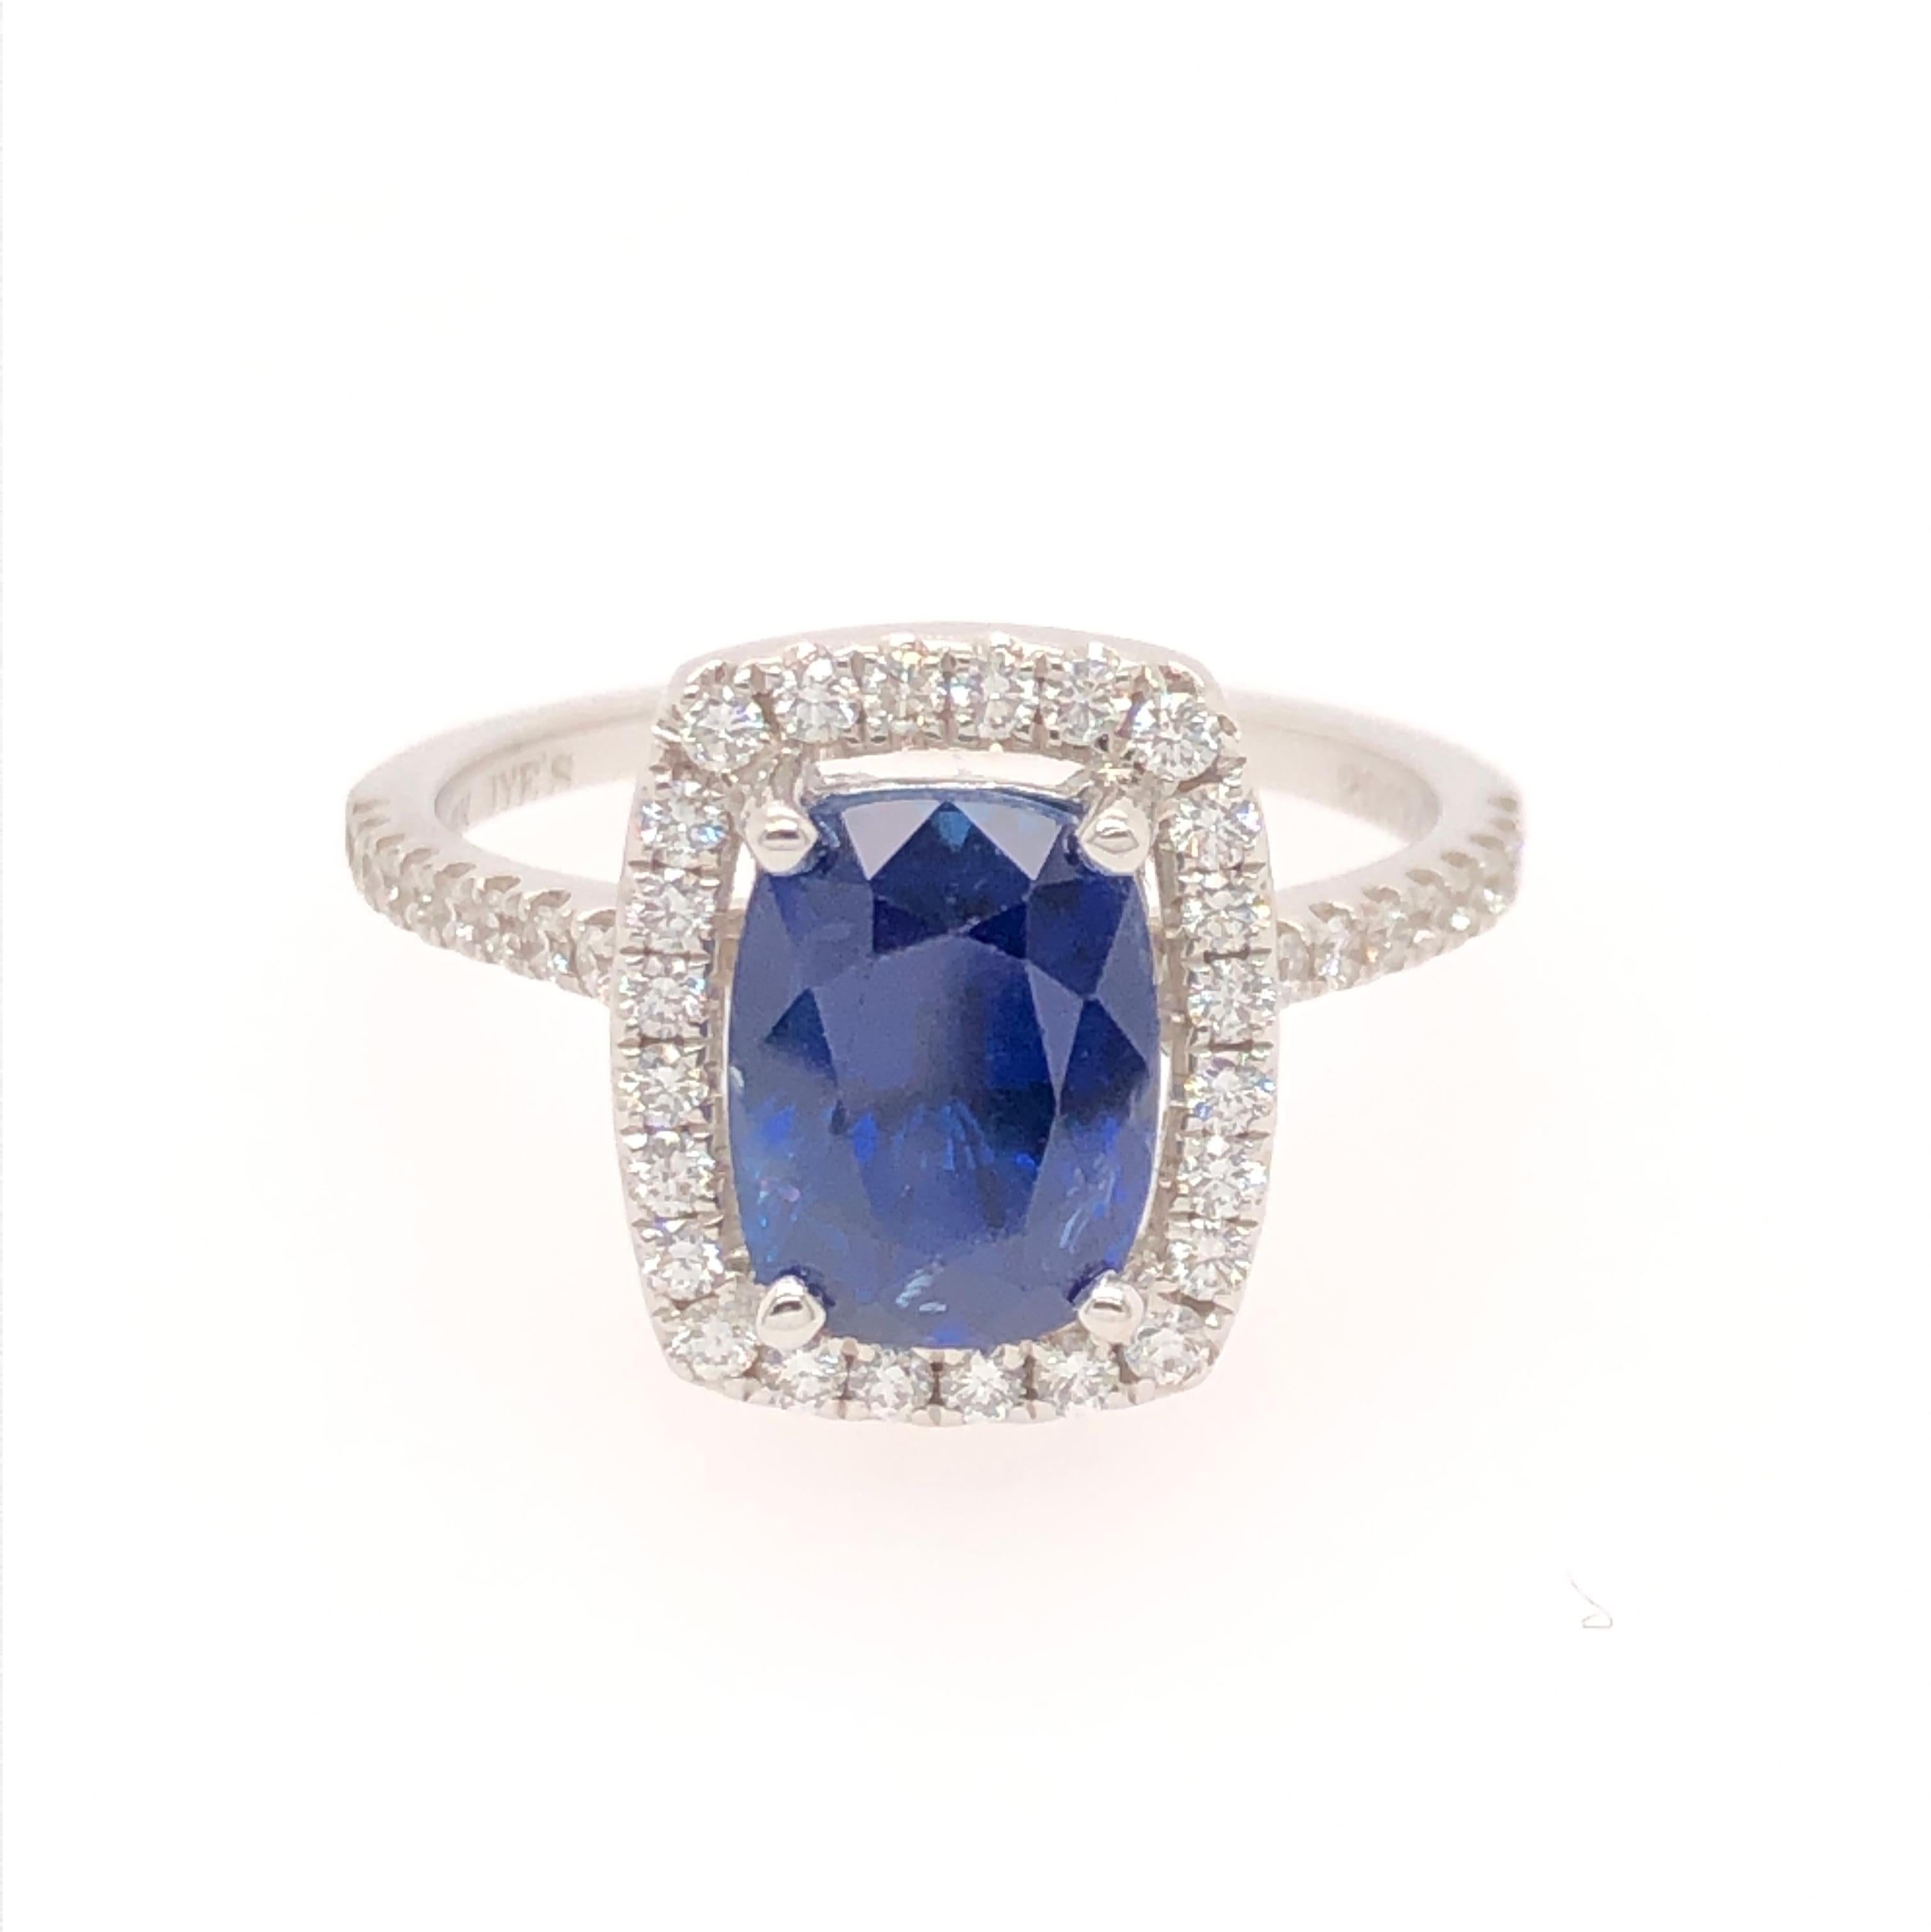 A classic, elegant combination this beautiful 3.13 CT rectangular cushion cut blue sapphire is surrounded  by a halo of round diamonds that flow down the shoulders (total weight .38CT). All is set into an 18 karat white gold ring.

The delicate